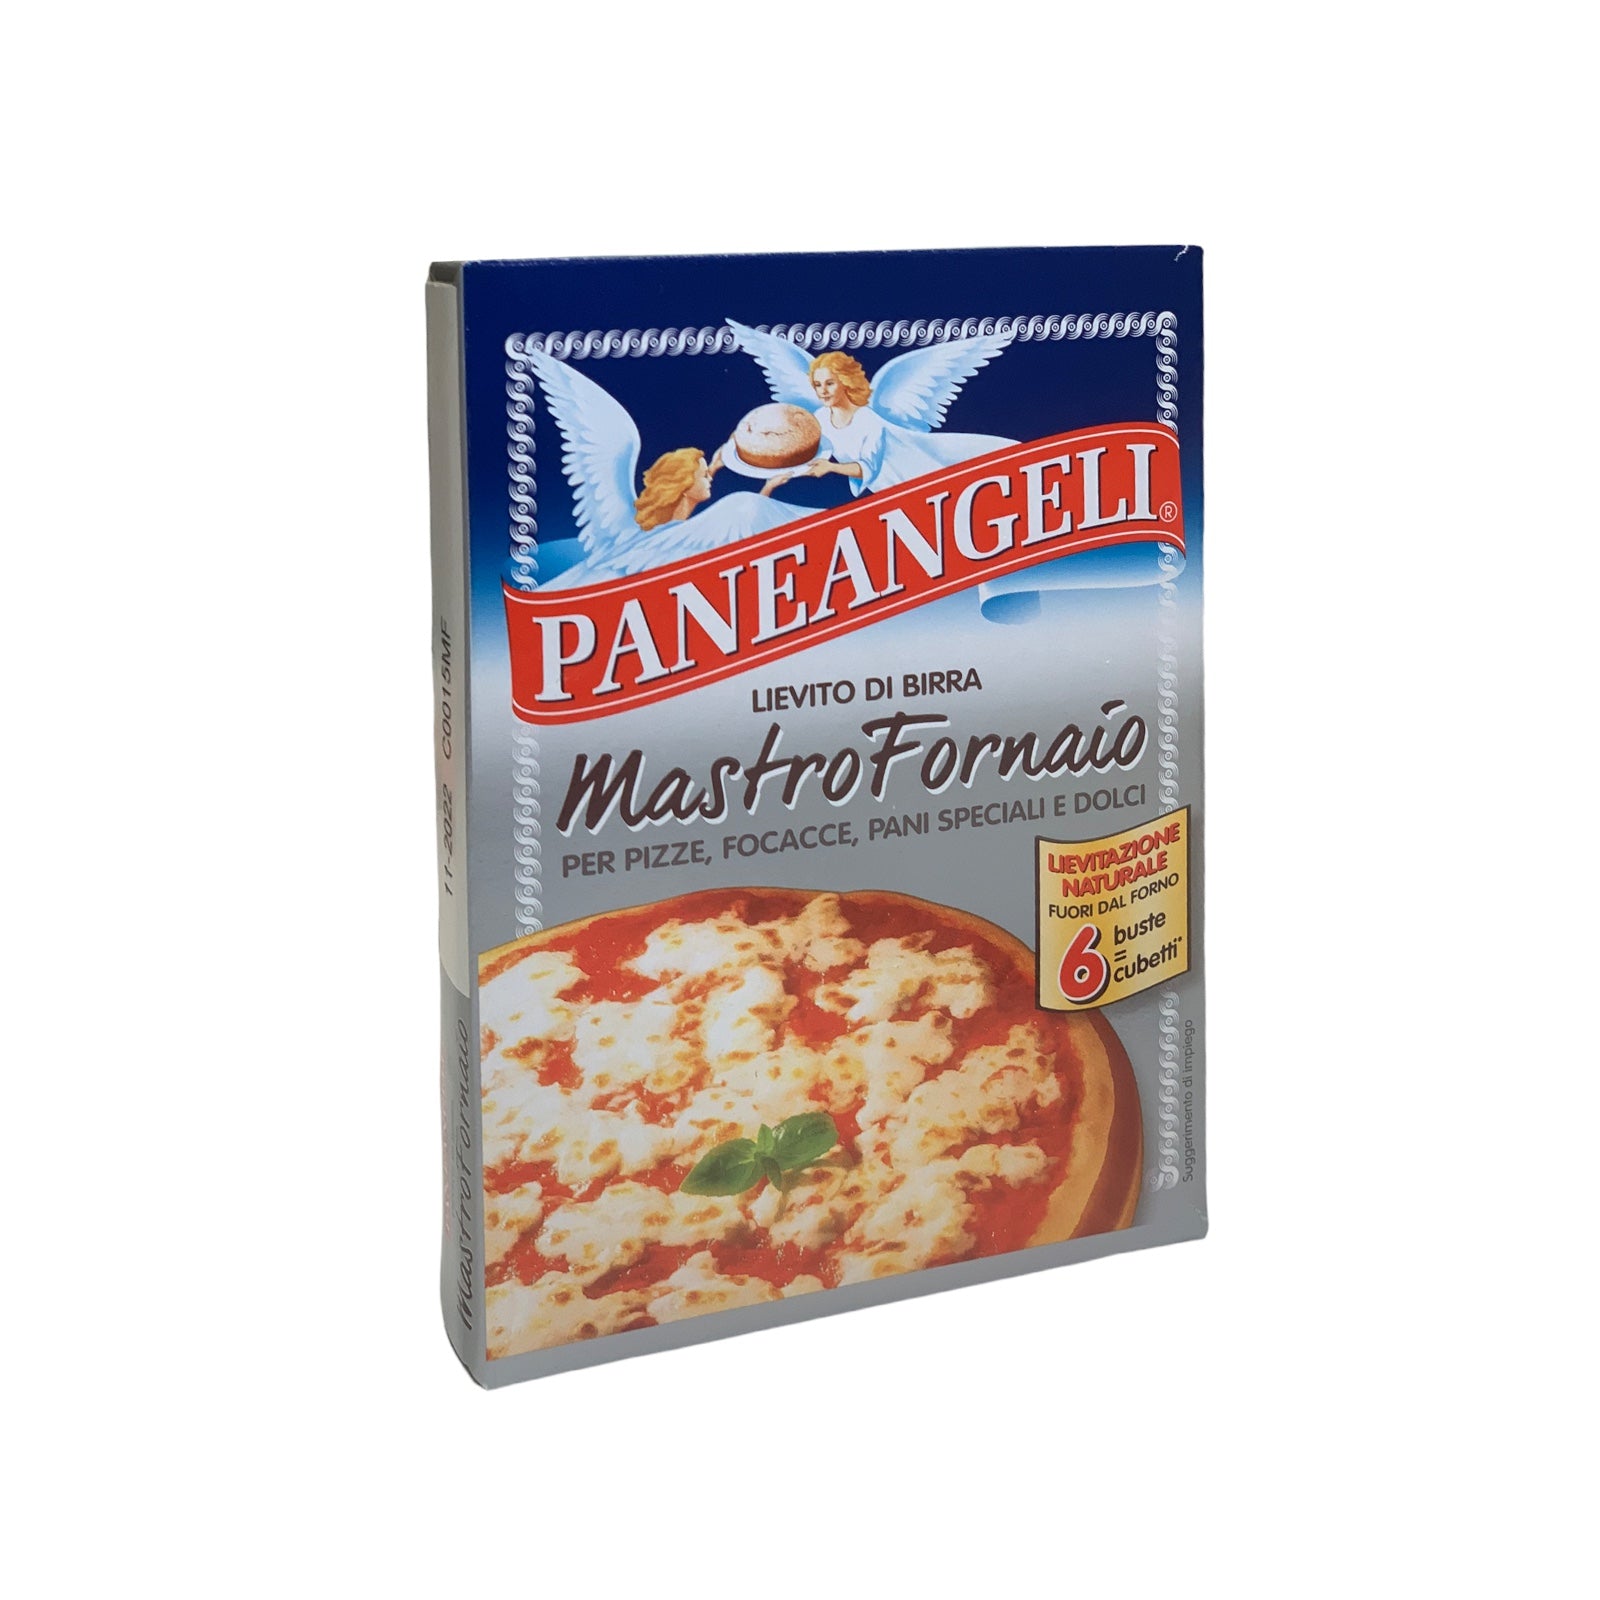 Yeast For Pizza- 6 Packets Paneangeli Mastro Fornaio